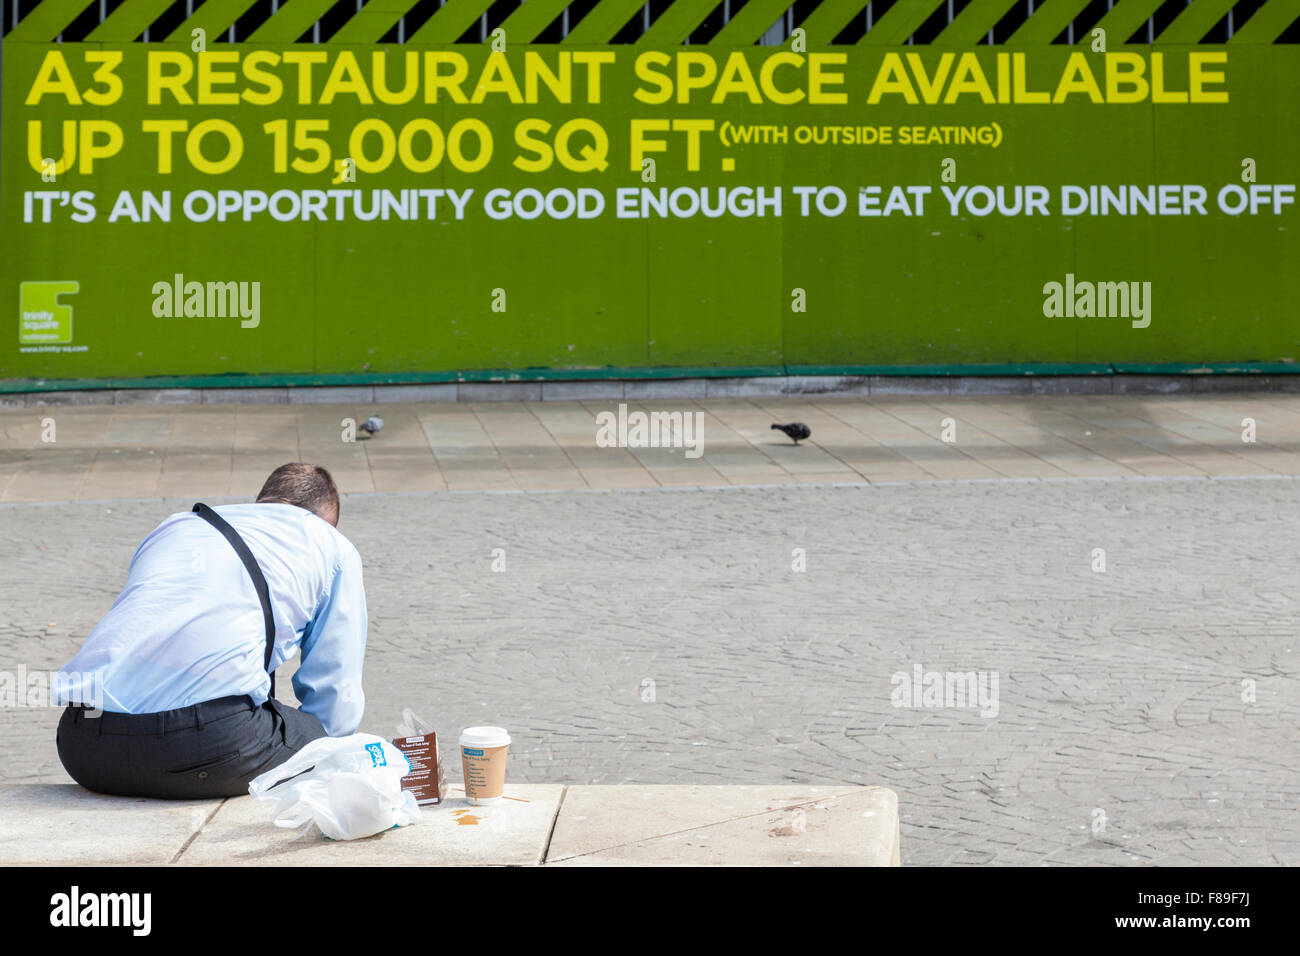 Food and drink humour. Man with take away food and drink sitting outside next to a restaurant space available sign, Nottingham, England, UK Stock Photo